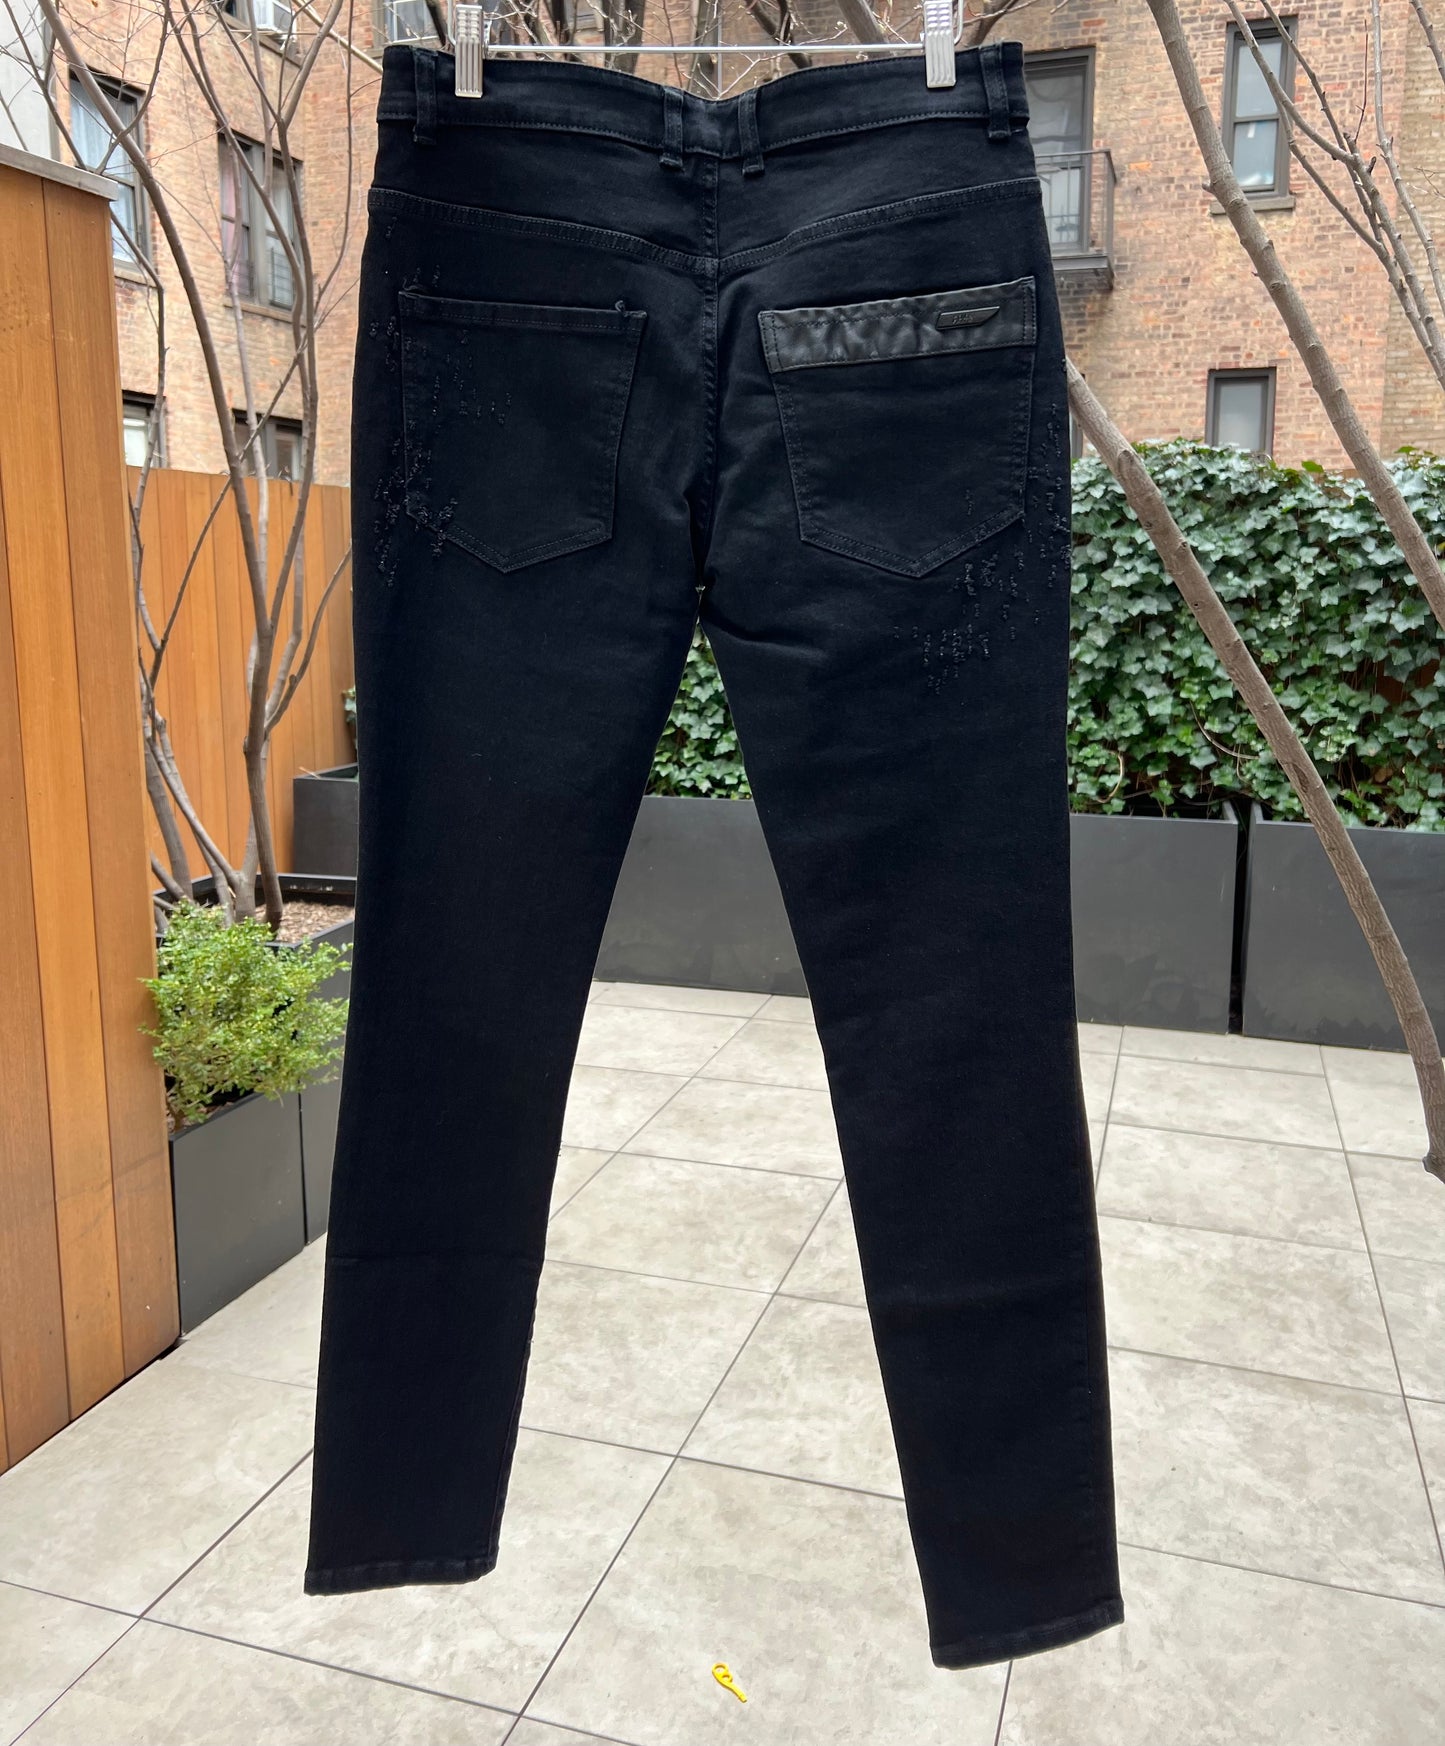 A pair of RH45 premium denim jeans hanging outdoors against a backdrop of trees and a building.